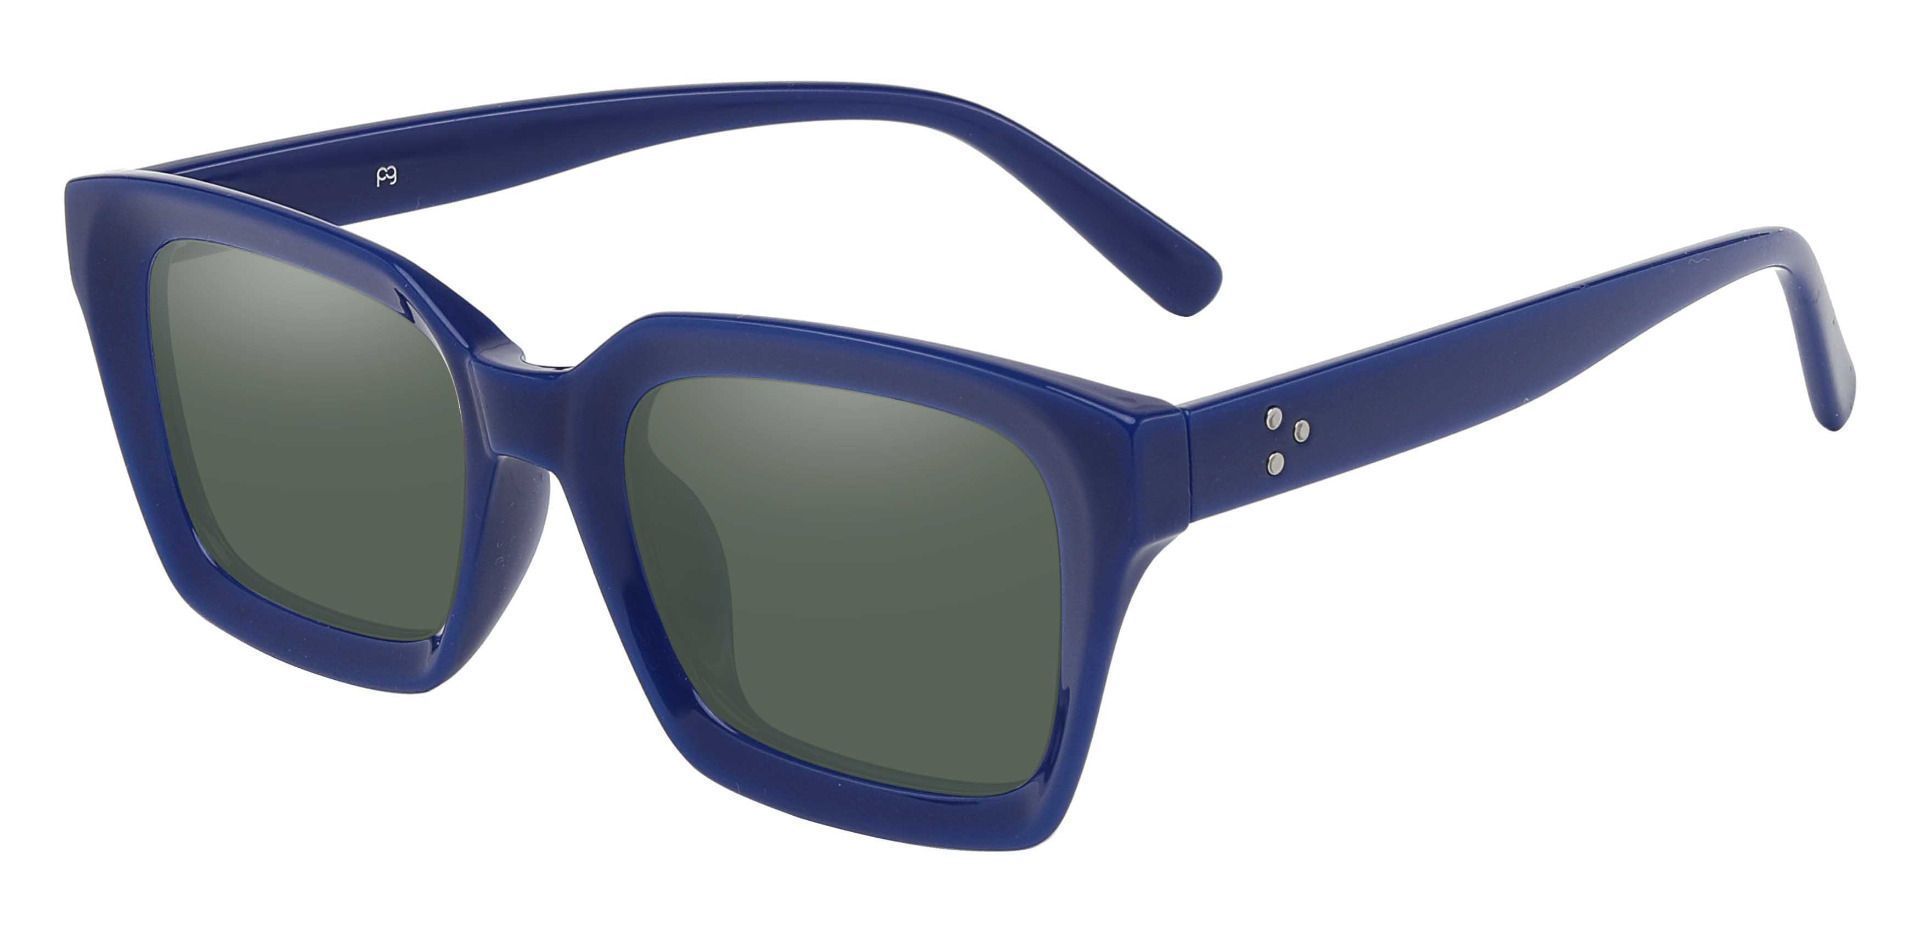 Unity Rectangle Non-Rx Sunglasses - Blue Frame With Green Lenses